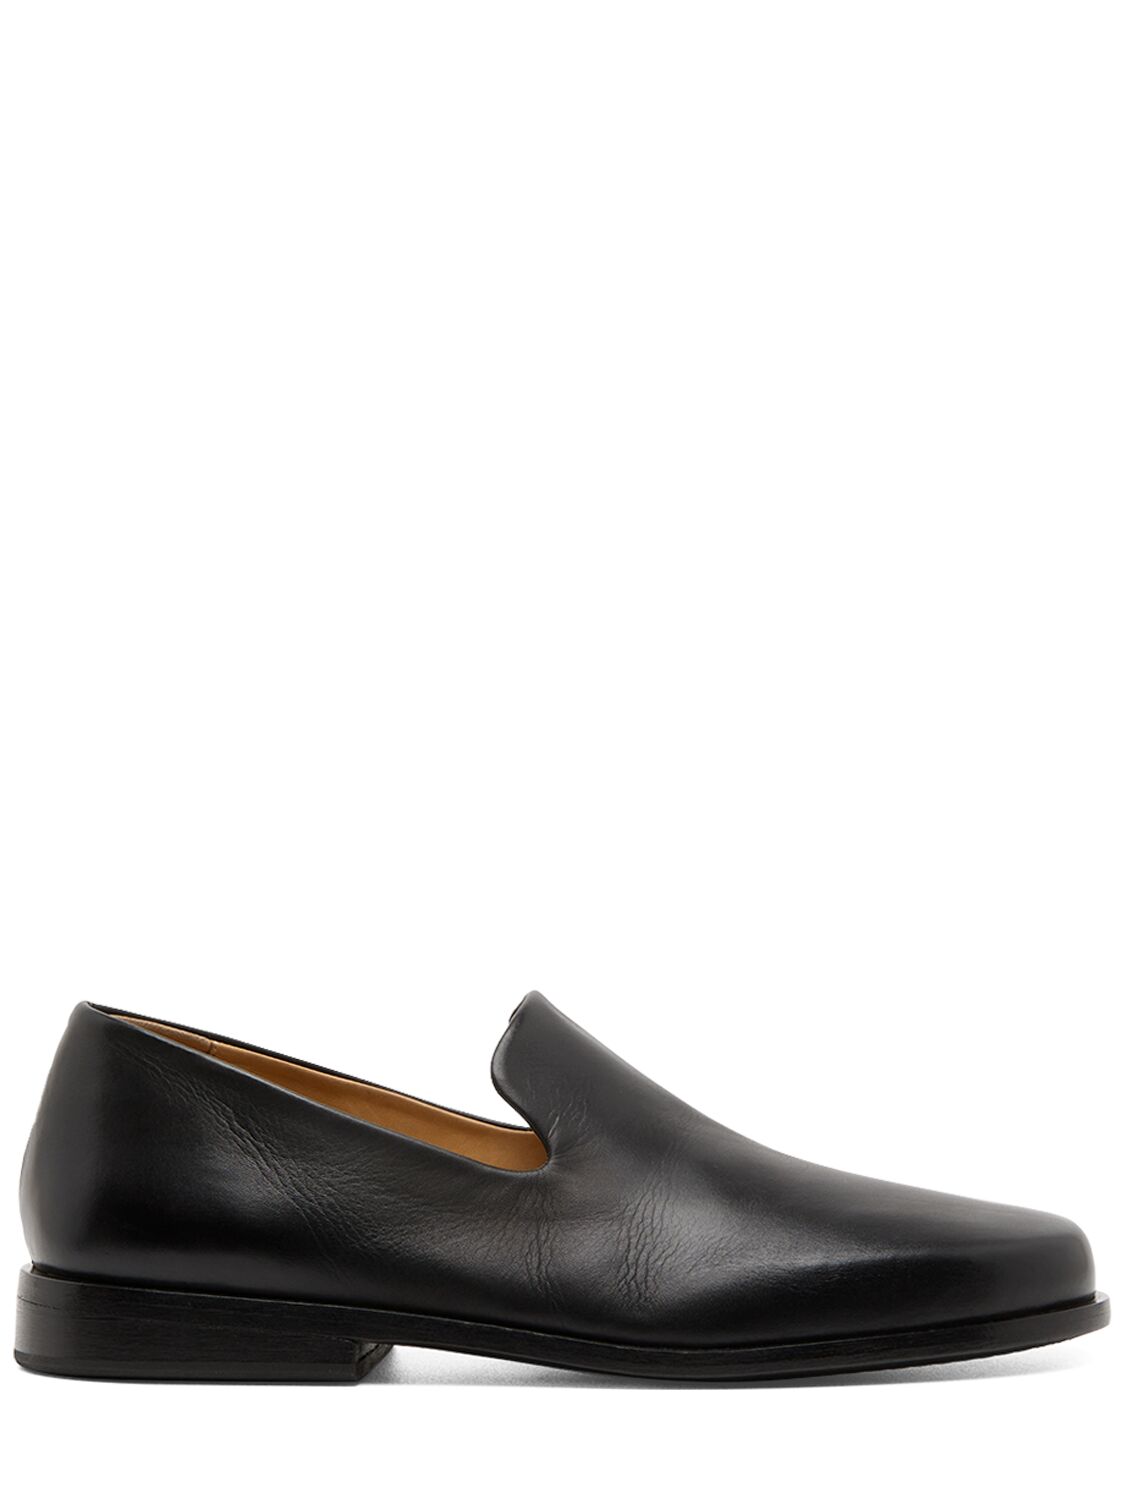 Image of Mocasso Leather Loafers